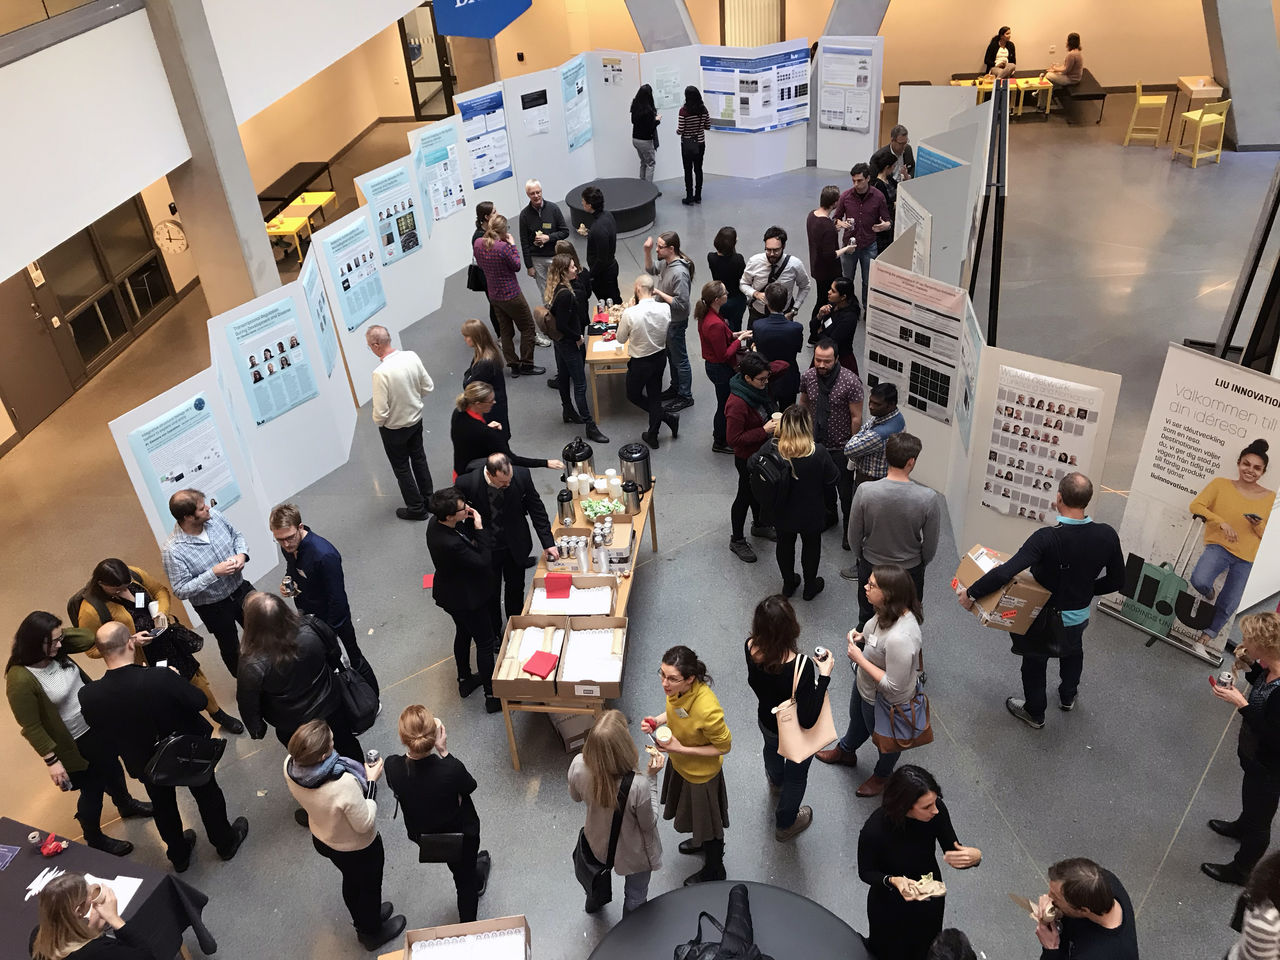 Poster exhibition during the WCMM Symposium